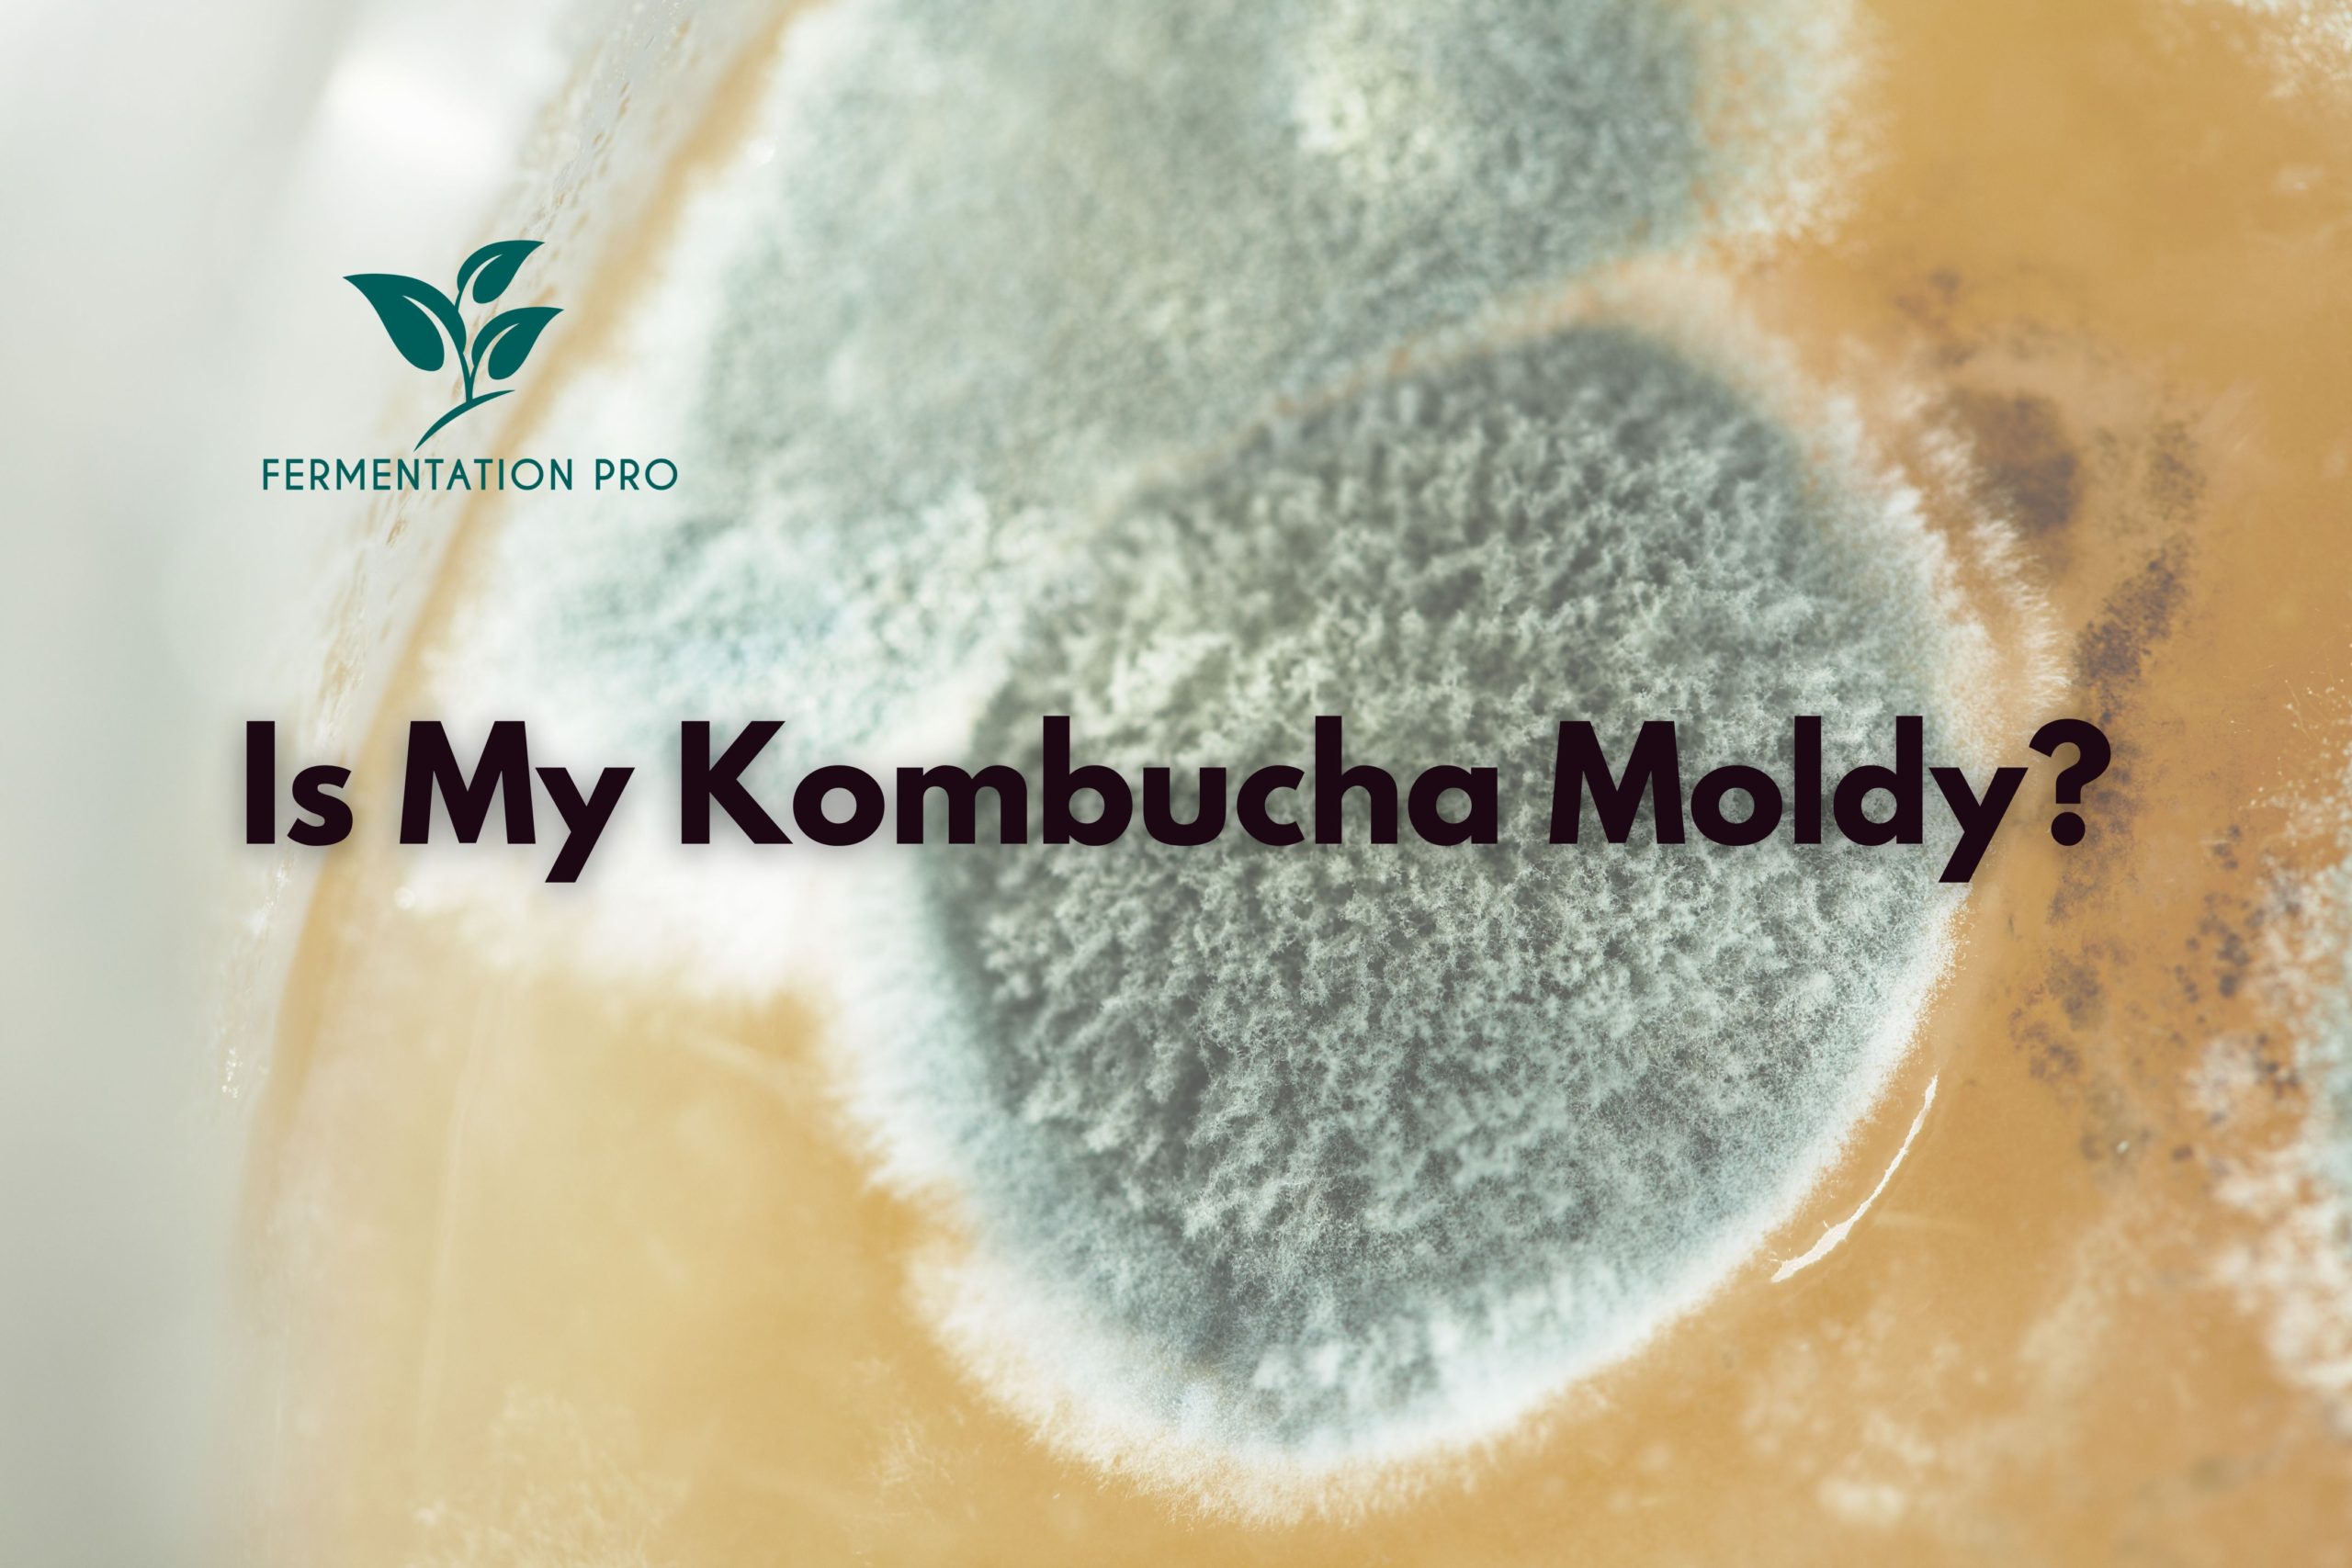 How to Tell if Your Kombucha is Moldy